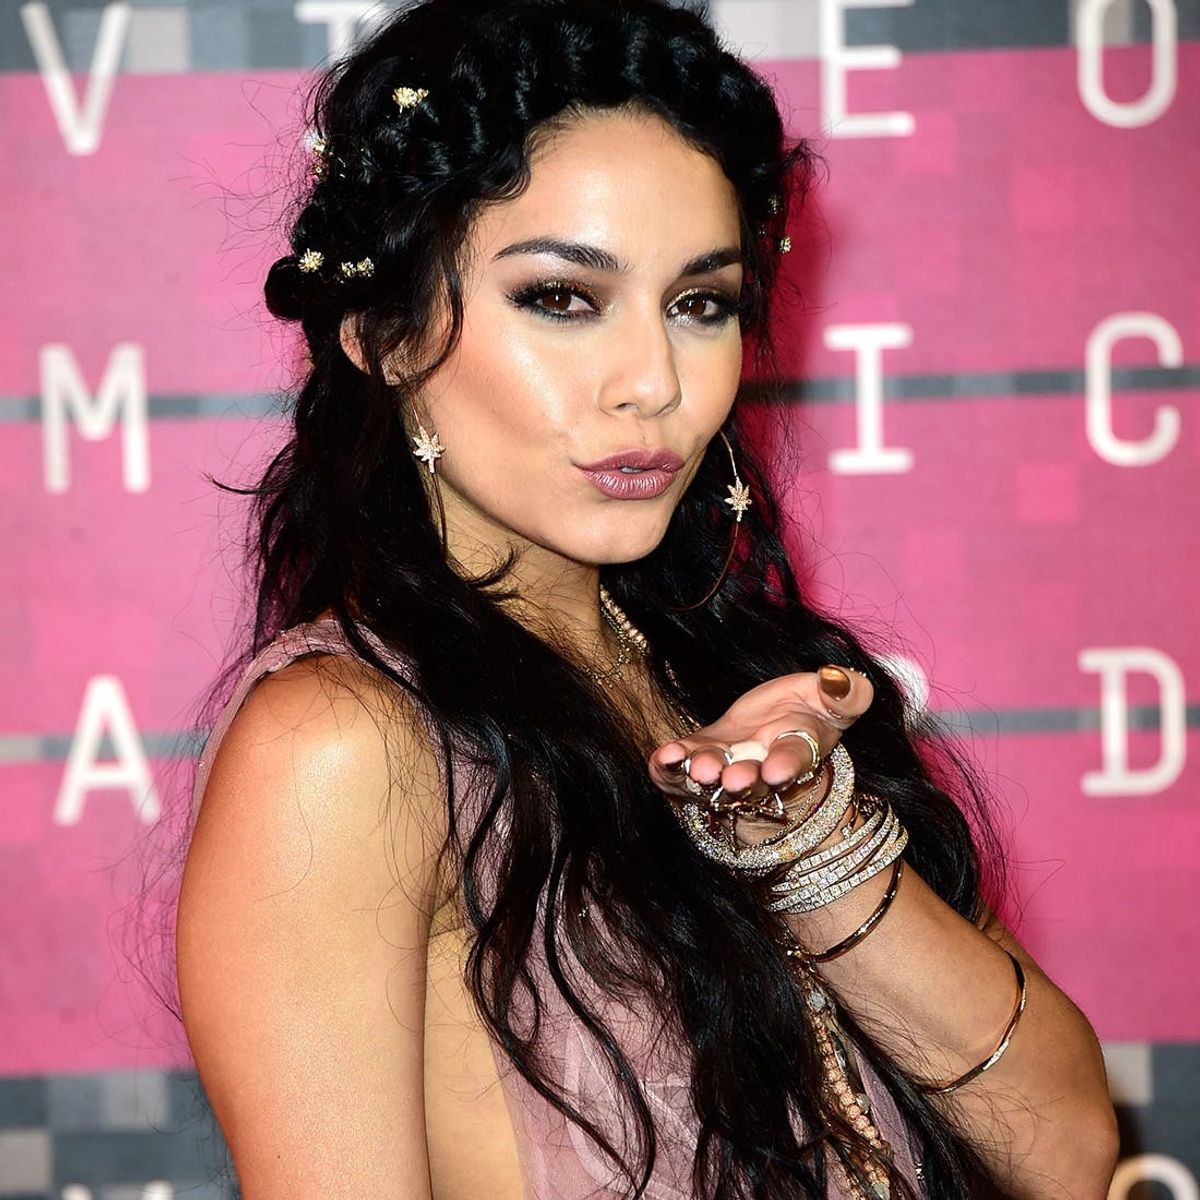 Vanessa Hudgens Just Launched a Lifestyle Website Boho Babes Will Love